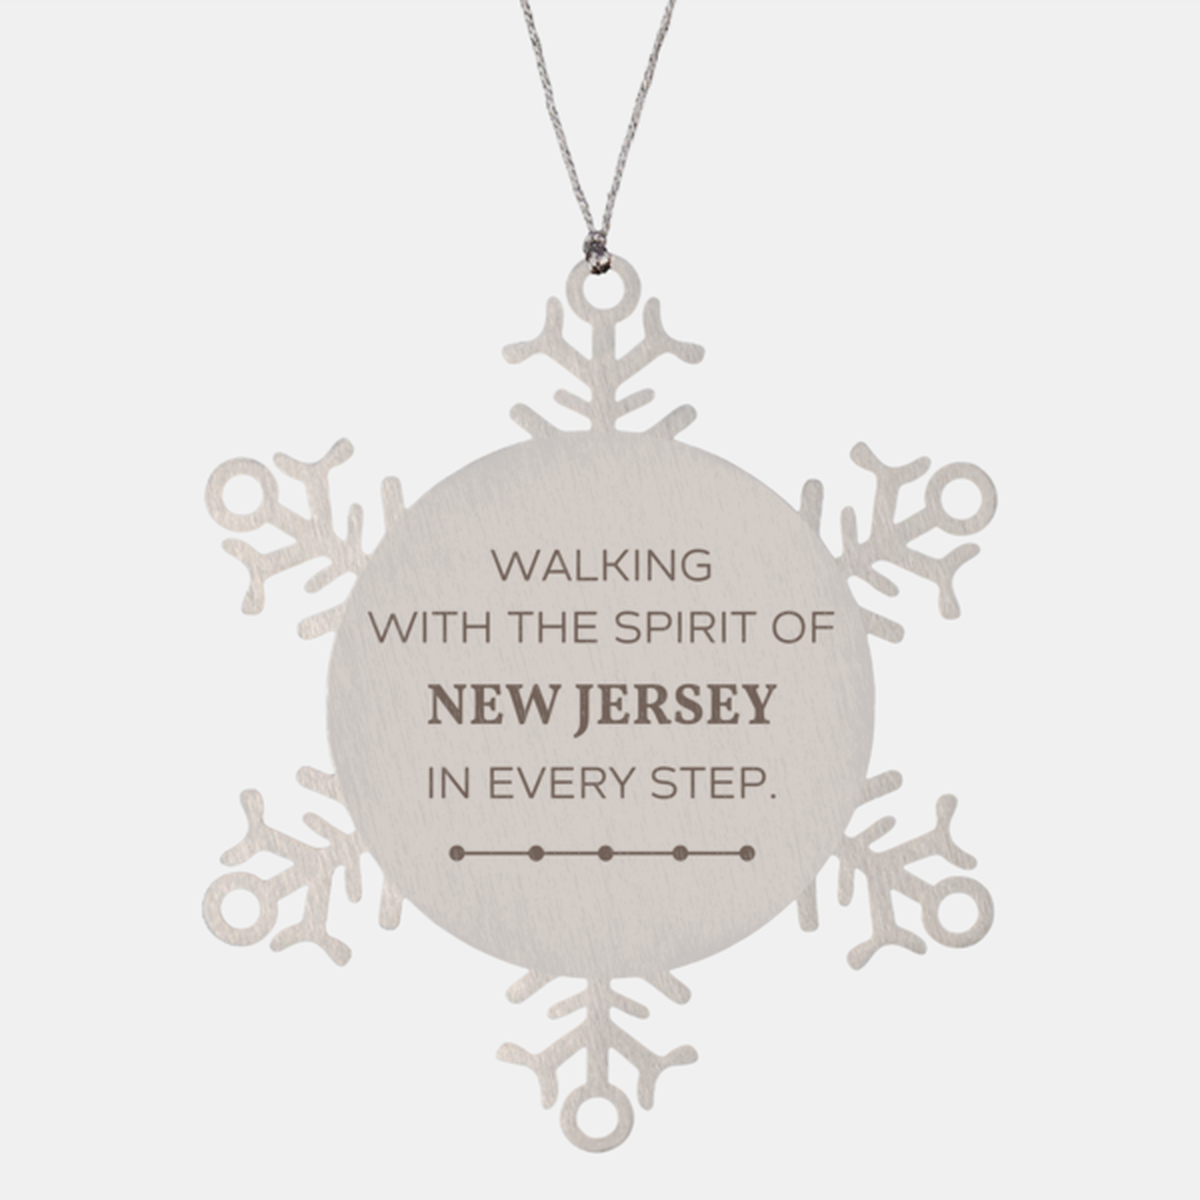 New Jersey Gifts, Walking with the spirit, Love New Jersey Birthday Christmas Snowflake Ornament For New Jersey People, Men, Women, Friends